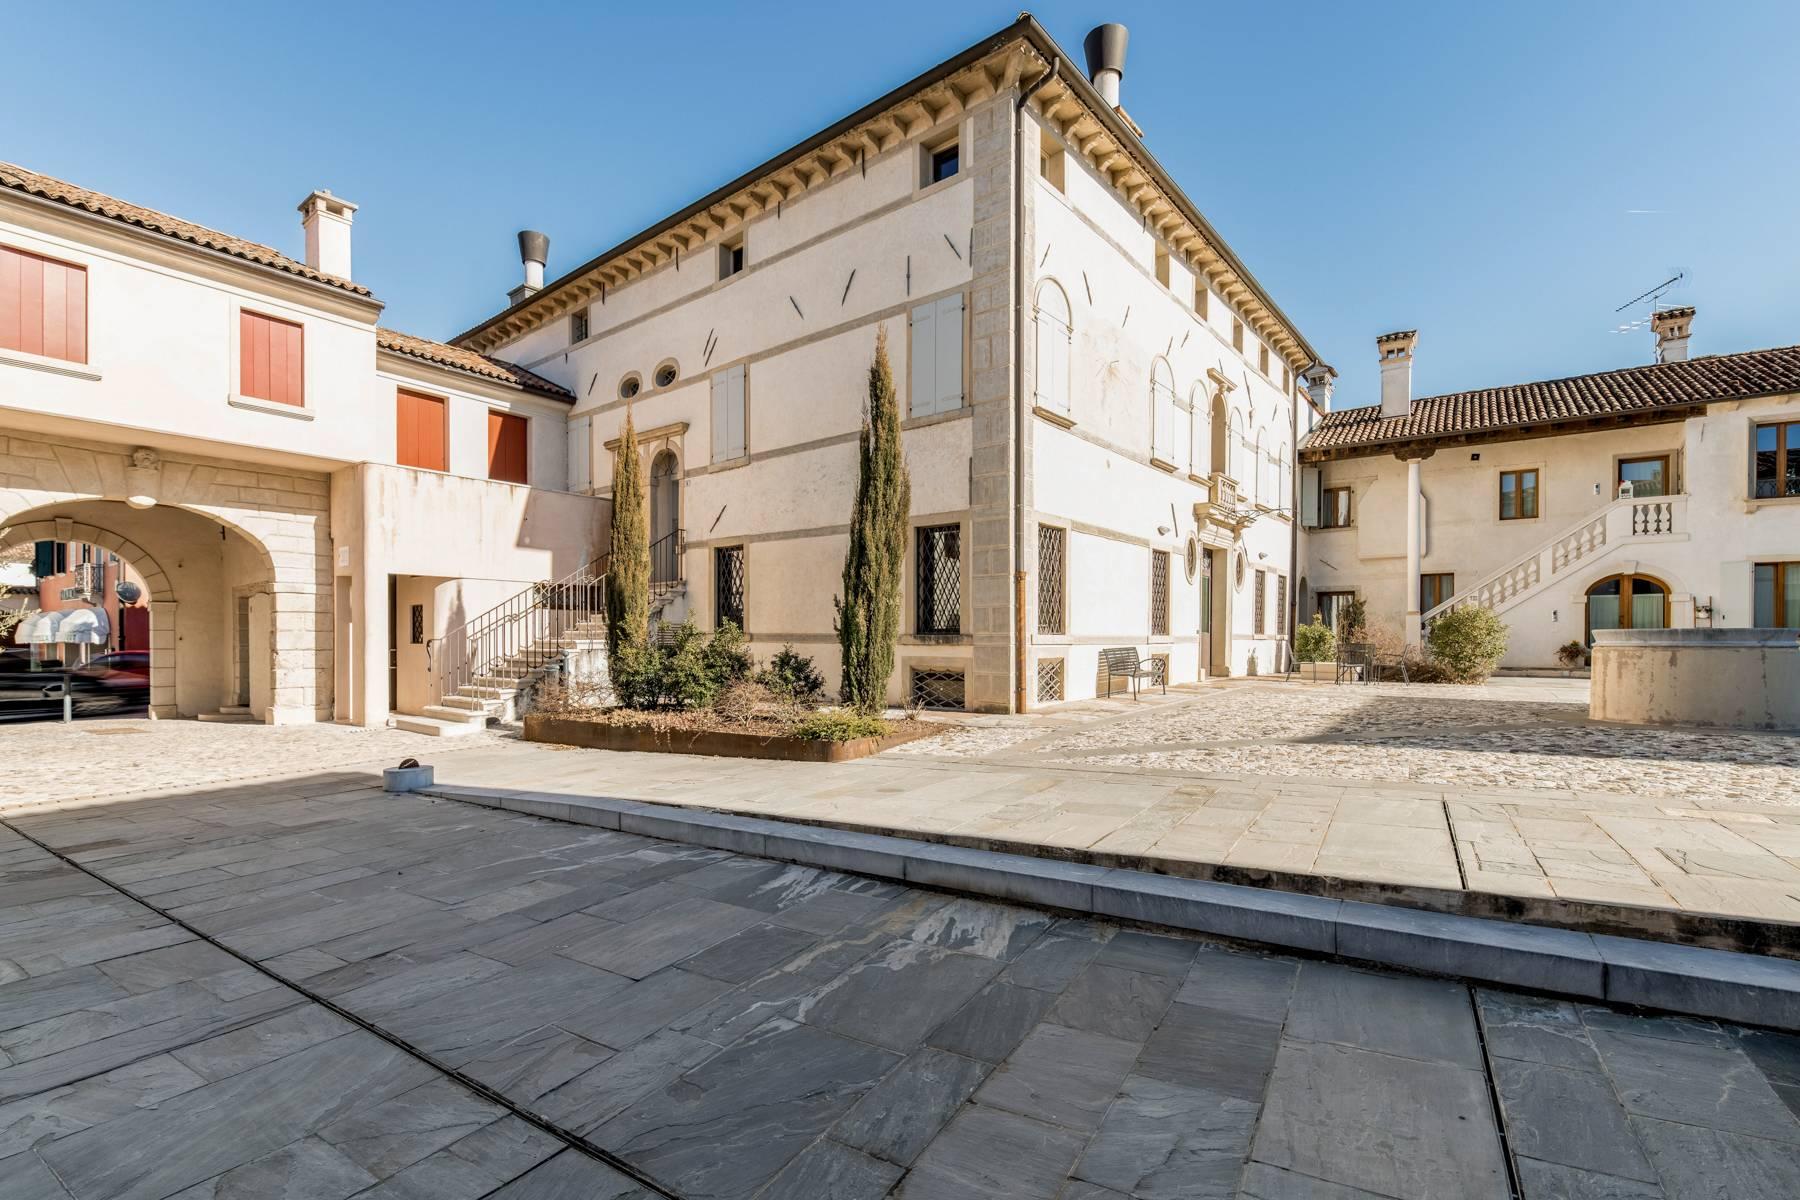 Luxurious penthouse on a 17th century Venetian Villa completely renovated - 20